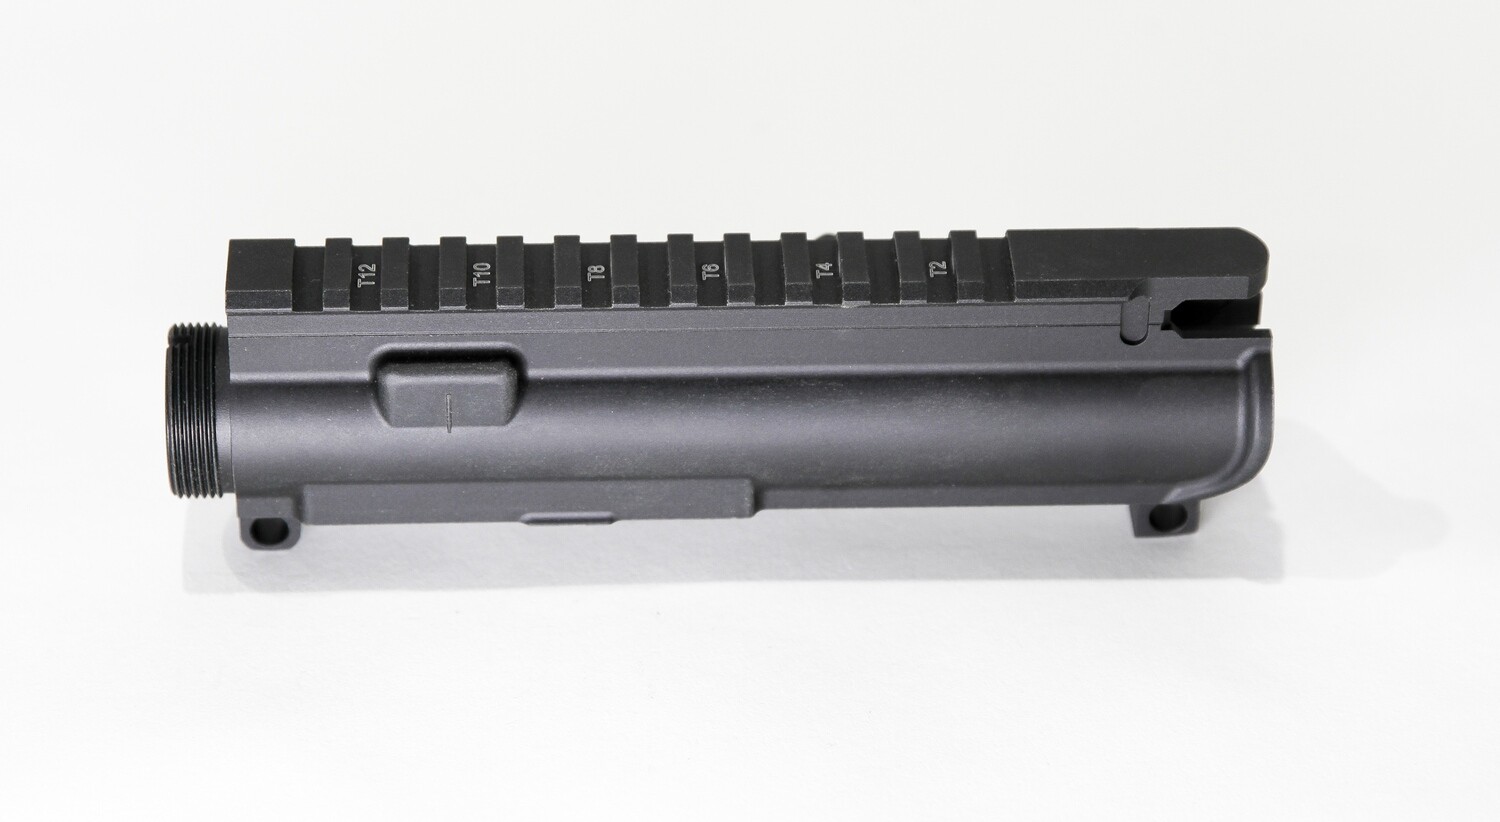 AR-15 Forged Upper Receiver Stripped